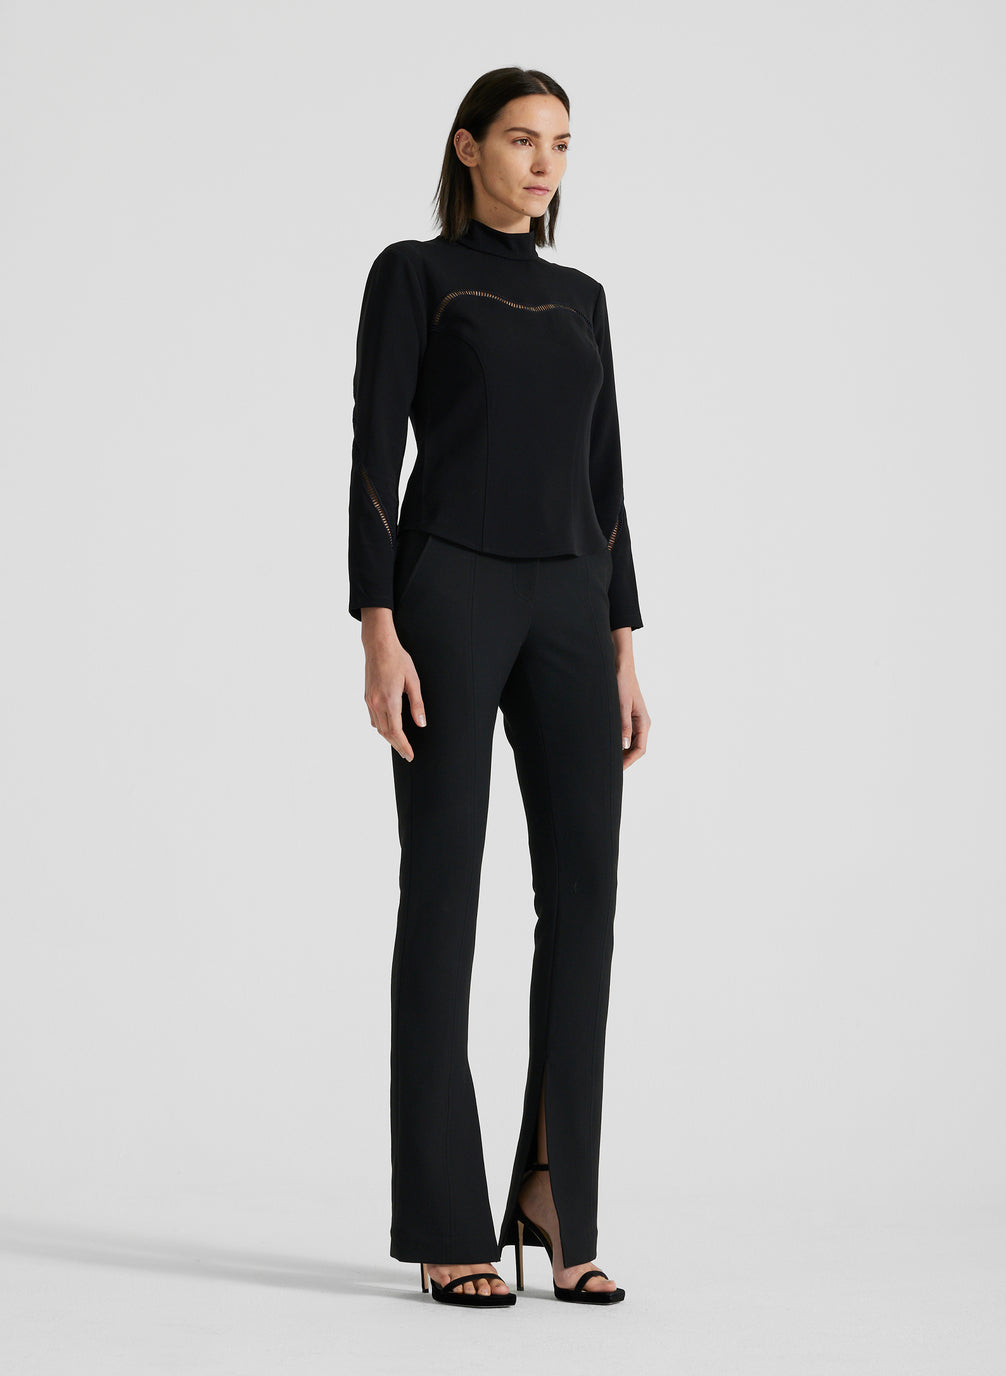 side view of woman wearing black long sleeve shirt and black pants